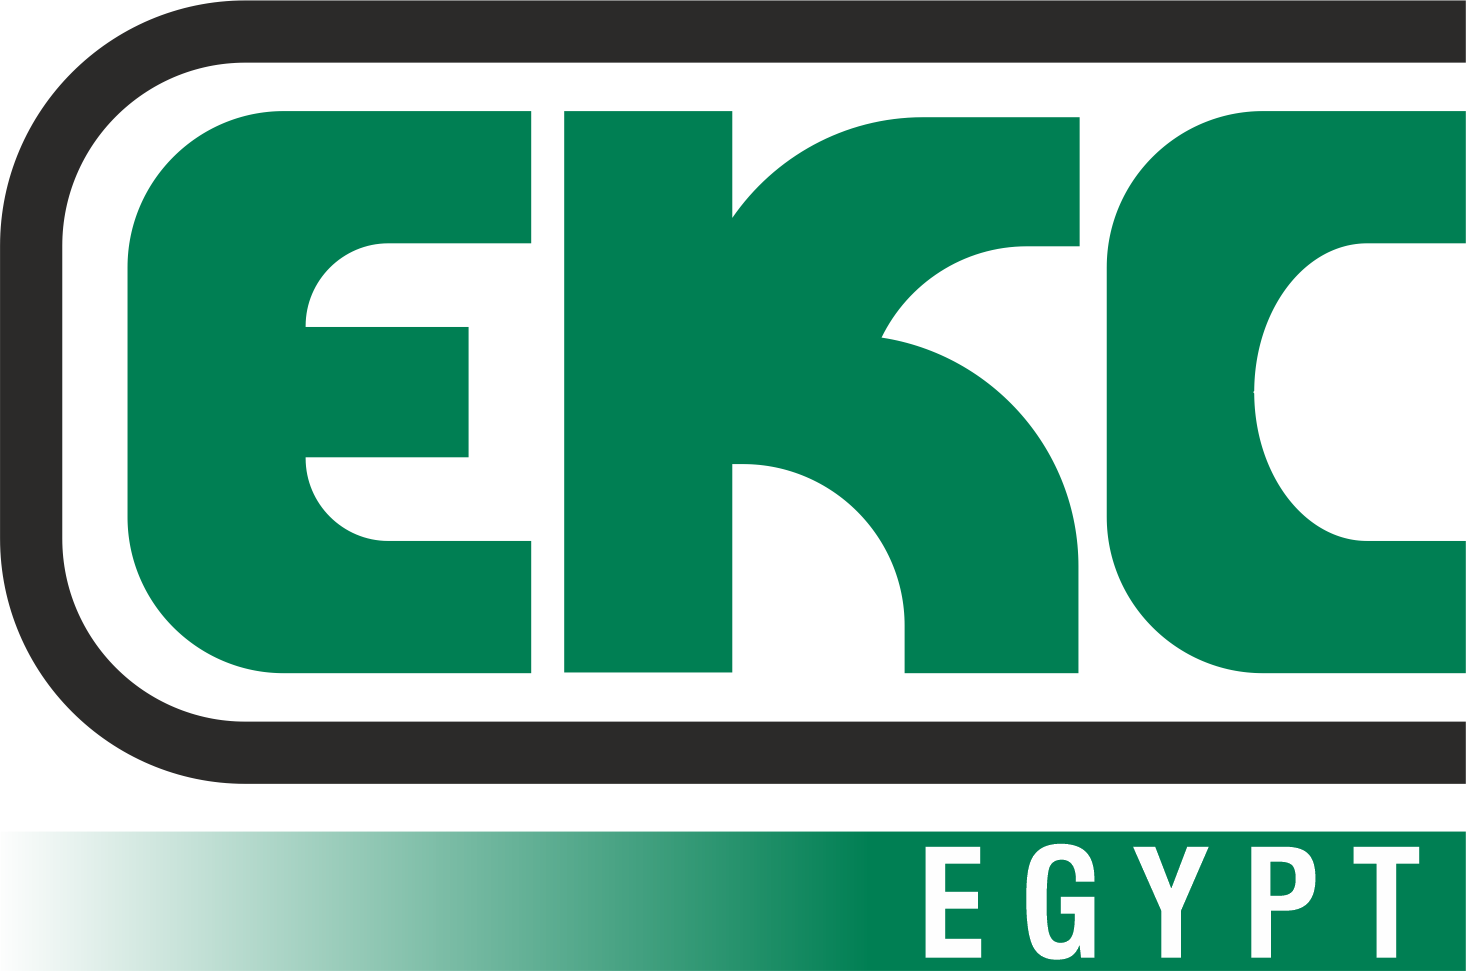 EKC EGYPT FOR MANUFACTURING HIGH PRESSURE CYLINDERS